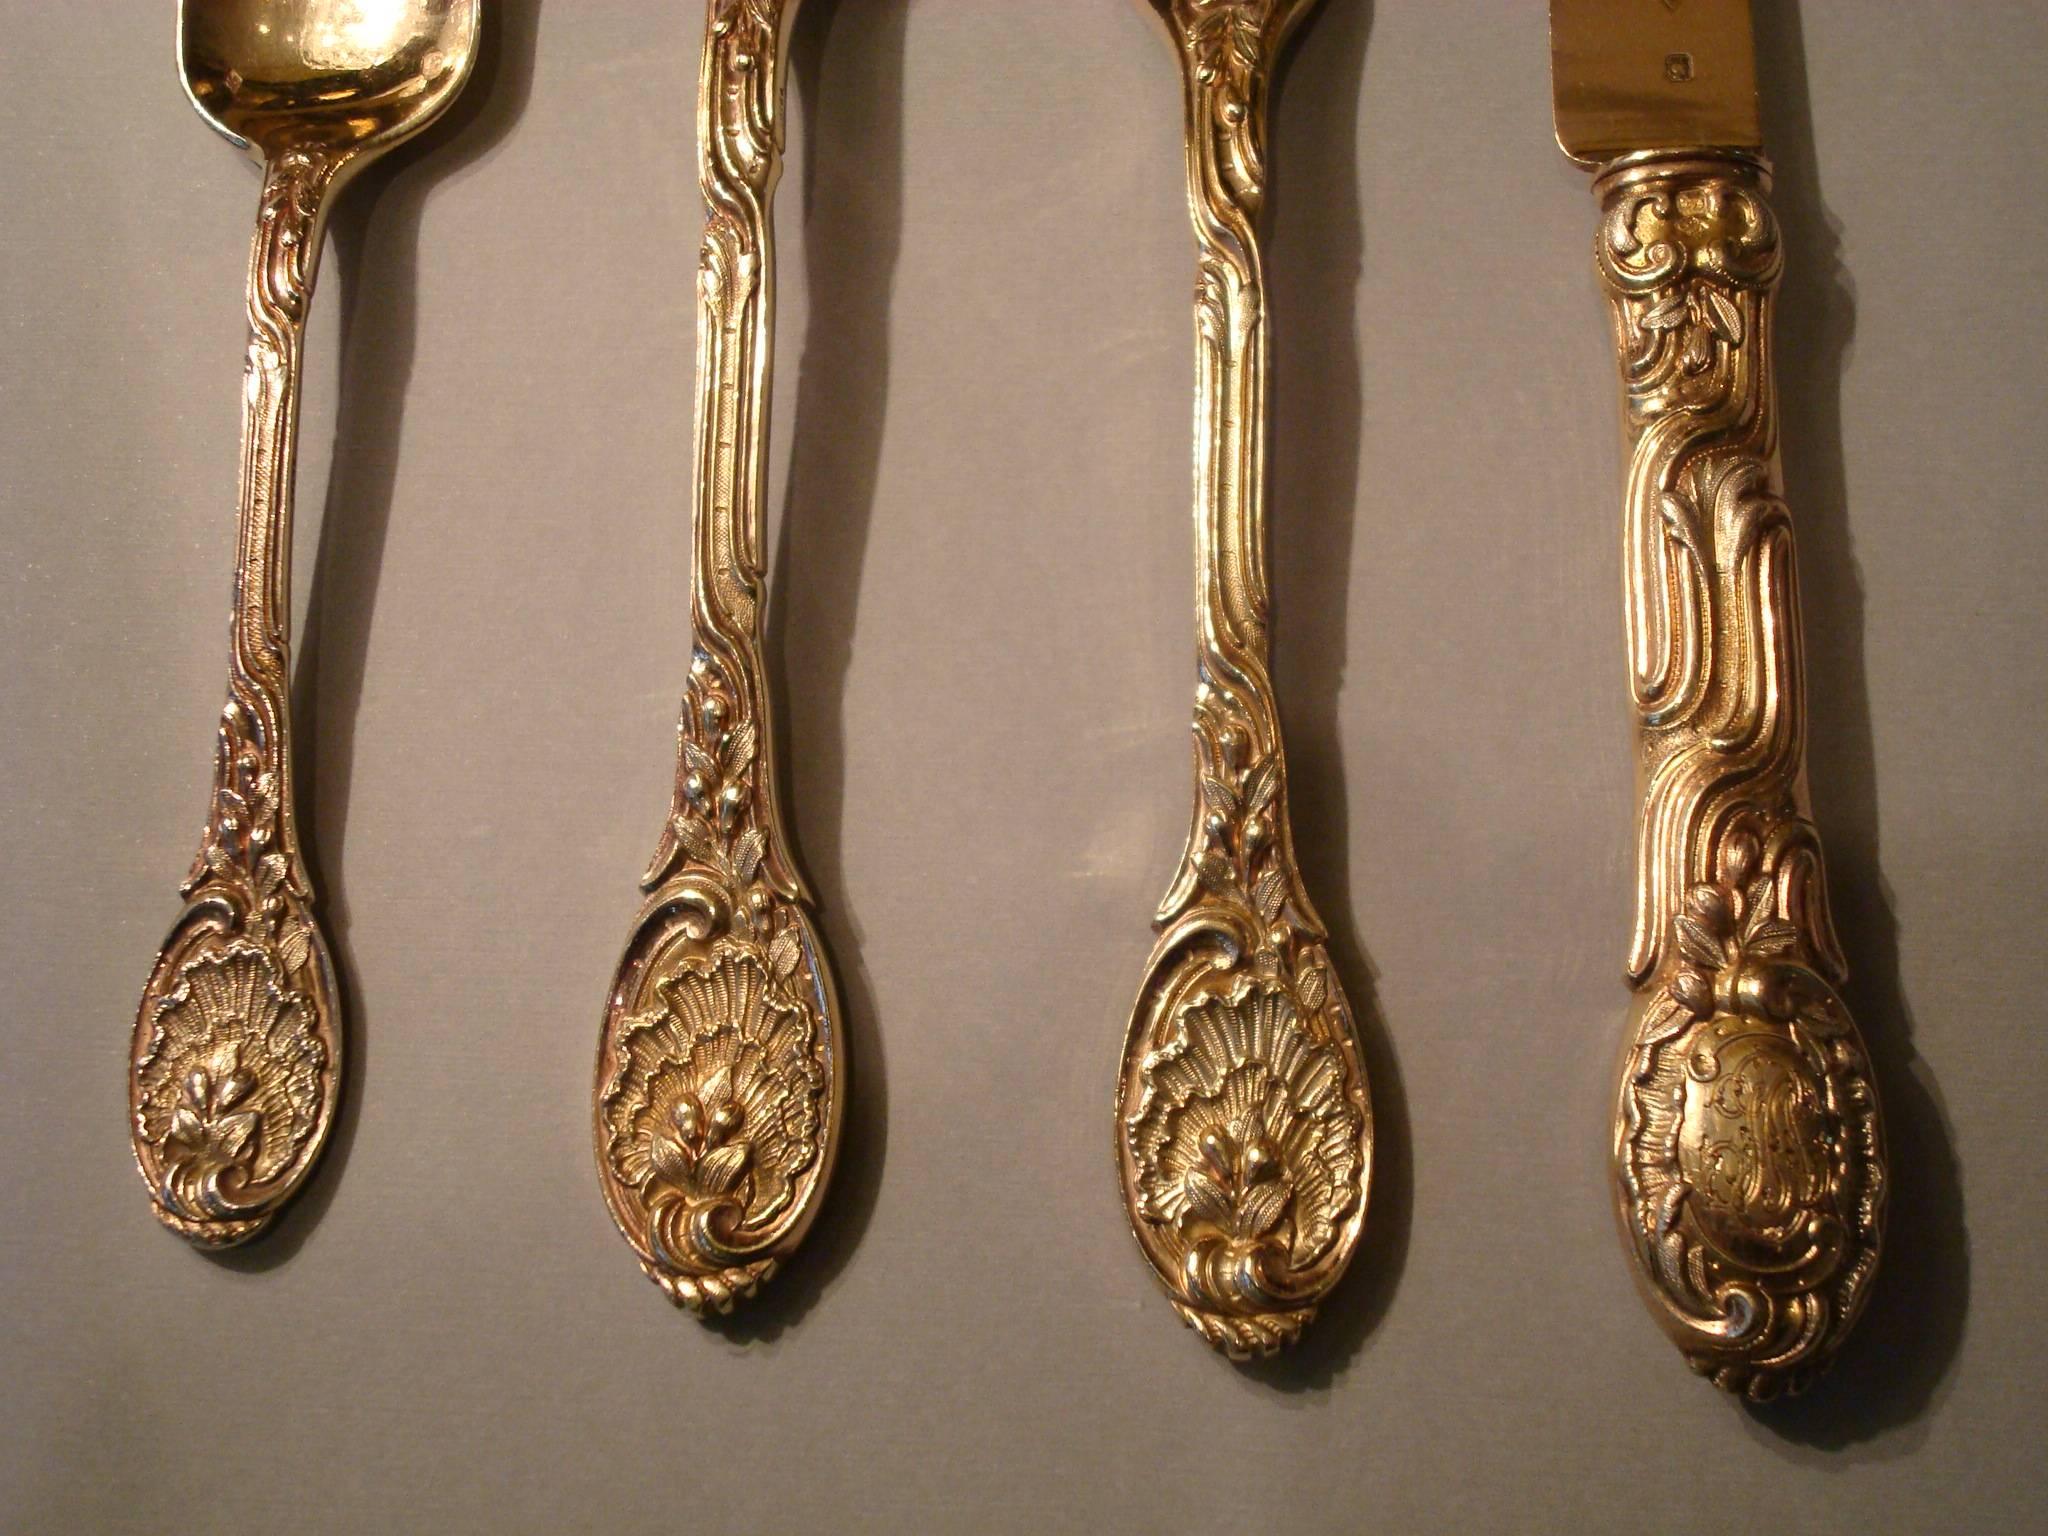 French Rococo Odiot Meissonnier Sterling Silver Cutlery Flatware for 12, France